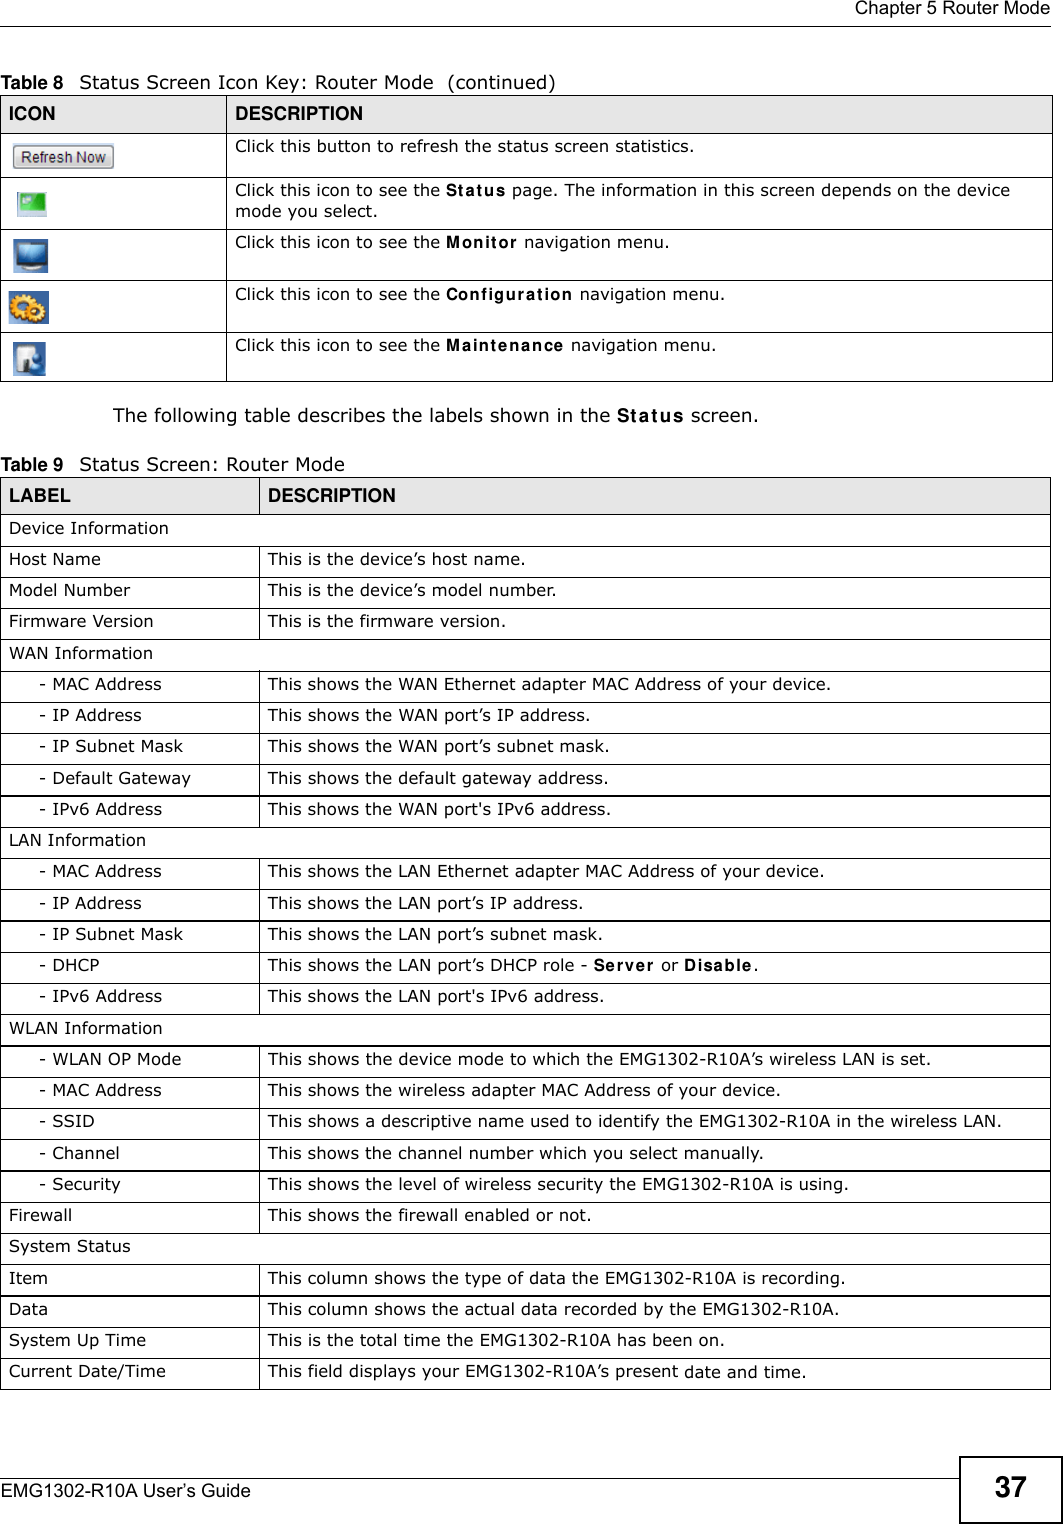  Chapter 5 Router ModeEMG1302-R10A User’s Guide 37The following table describes the labels shown in the Stat u s screen.Click this button to refresh the status screen statistics.Click this icon to see the St a t us page. The information in this screen depends on the device mode you select. Click this icon to see the M onitor navigation menu. Click this icon to see the Conf igu r a t ion  navigation menu. Click this icon to see the M a in t e na n ce  navigation menu. Table 8   Status Screen Icon Key: Router Mode  (continued)ICON DESCRIPTIONTable 9   Status Screen: Router Mode  LABEL DESCRIPTIONDevice InformationHost Name This is the device’s host name.Model Number This is the device’s model number.Firmware Version This is the firmware version. WAN Information- MAC Address This shows the WAN Ethernet adapter MAC Address of your device.- IP Address This shows the WAN port’s IP address.- IP Subnet Mask This shows the WAN port’s subnet mask.- Default Gateway This shows the default gateway address.- IPv6 Address This shows the WAN port&apos;s IPv6 address.LAN Information- MAC Address This shows the LAN Ethernet adapter MAC Address of your device.- IP Address This shows the LAN port’s IP address.- IP Subnet Mask This shows the LAN port’s subnet mask.- DHCP This shows the LAN port’s DHCP role - Se r ver or Disa ble.- IPv6 Address This shows the LAN port&apos;s IPv6 address.WLAN Information- WLAN OP Mode This shows the device mode to which the EMG1302-R10A’s wireless LAN is set.- MAC Address This shows the wireless adapter MAC Address of your device.- SSID This shows a descriptive name used to identify the EMG1302-R10A in the wireless LAN. - Channel This shows the channel number which you select manually.- Security This shows the level of wireless security the EMG1302-R10A is using.Firewall This shows the firewall enabled or not.System StatusItem This column shows the type of data the EMG1302-R10A is recording.Data This column shows the actual data recorded by the EMG1302-R10A.System Up Time This is the total time the EMG1302-R10A has been on.Current Date/Time This field displays your EMG1302-R10A’s present date and time.